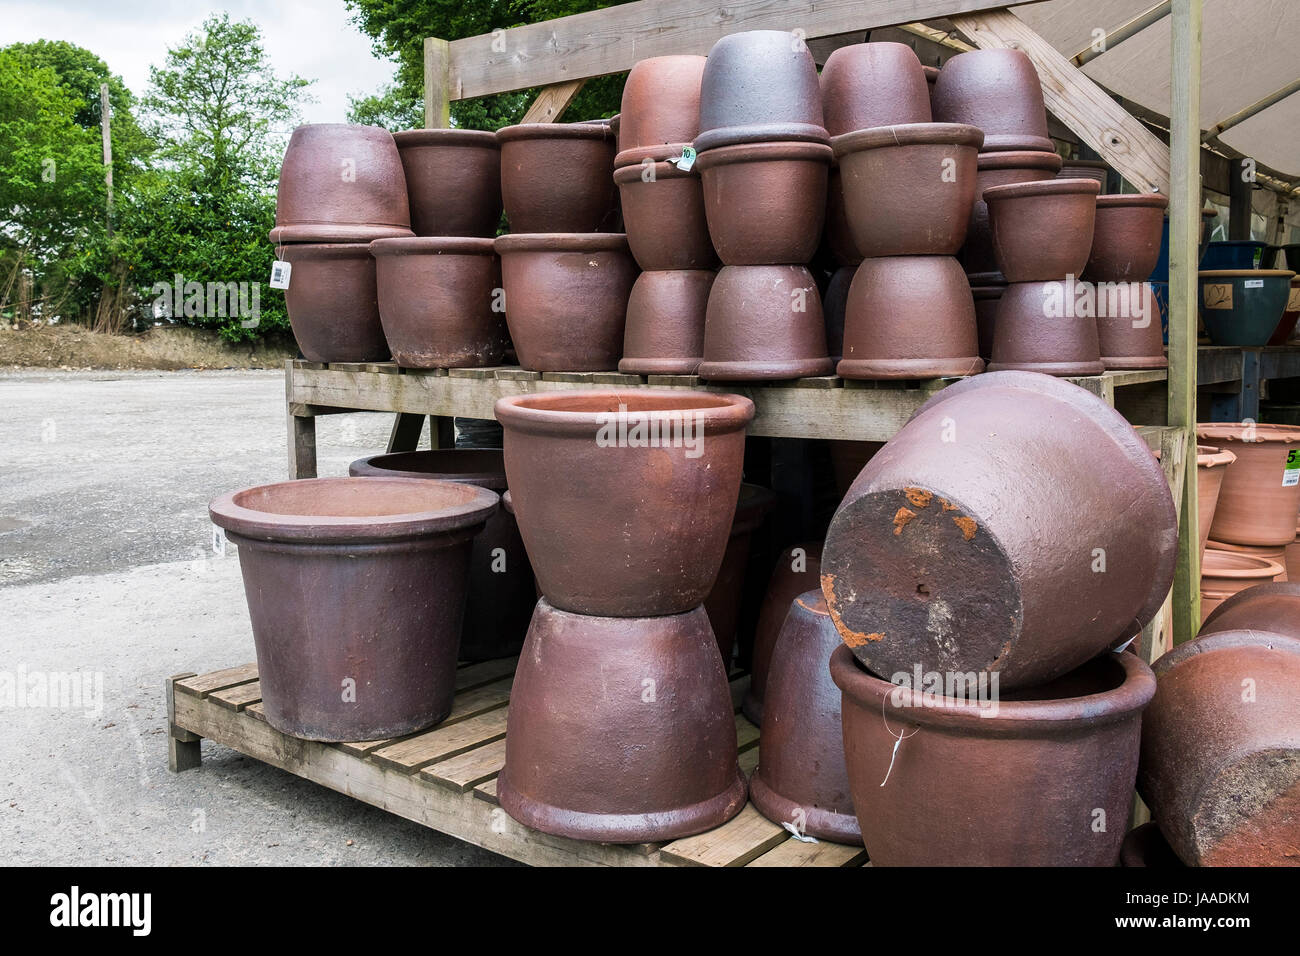 A variety of ceramic plant pots for sale in a Garden Centre. Stock Photo